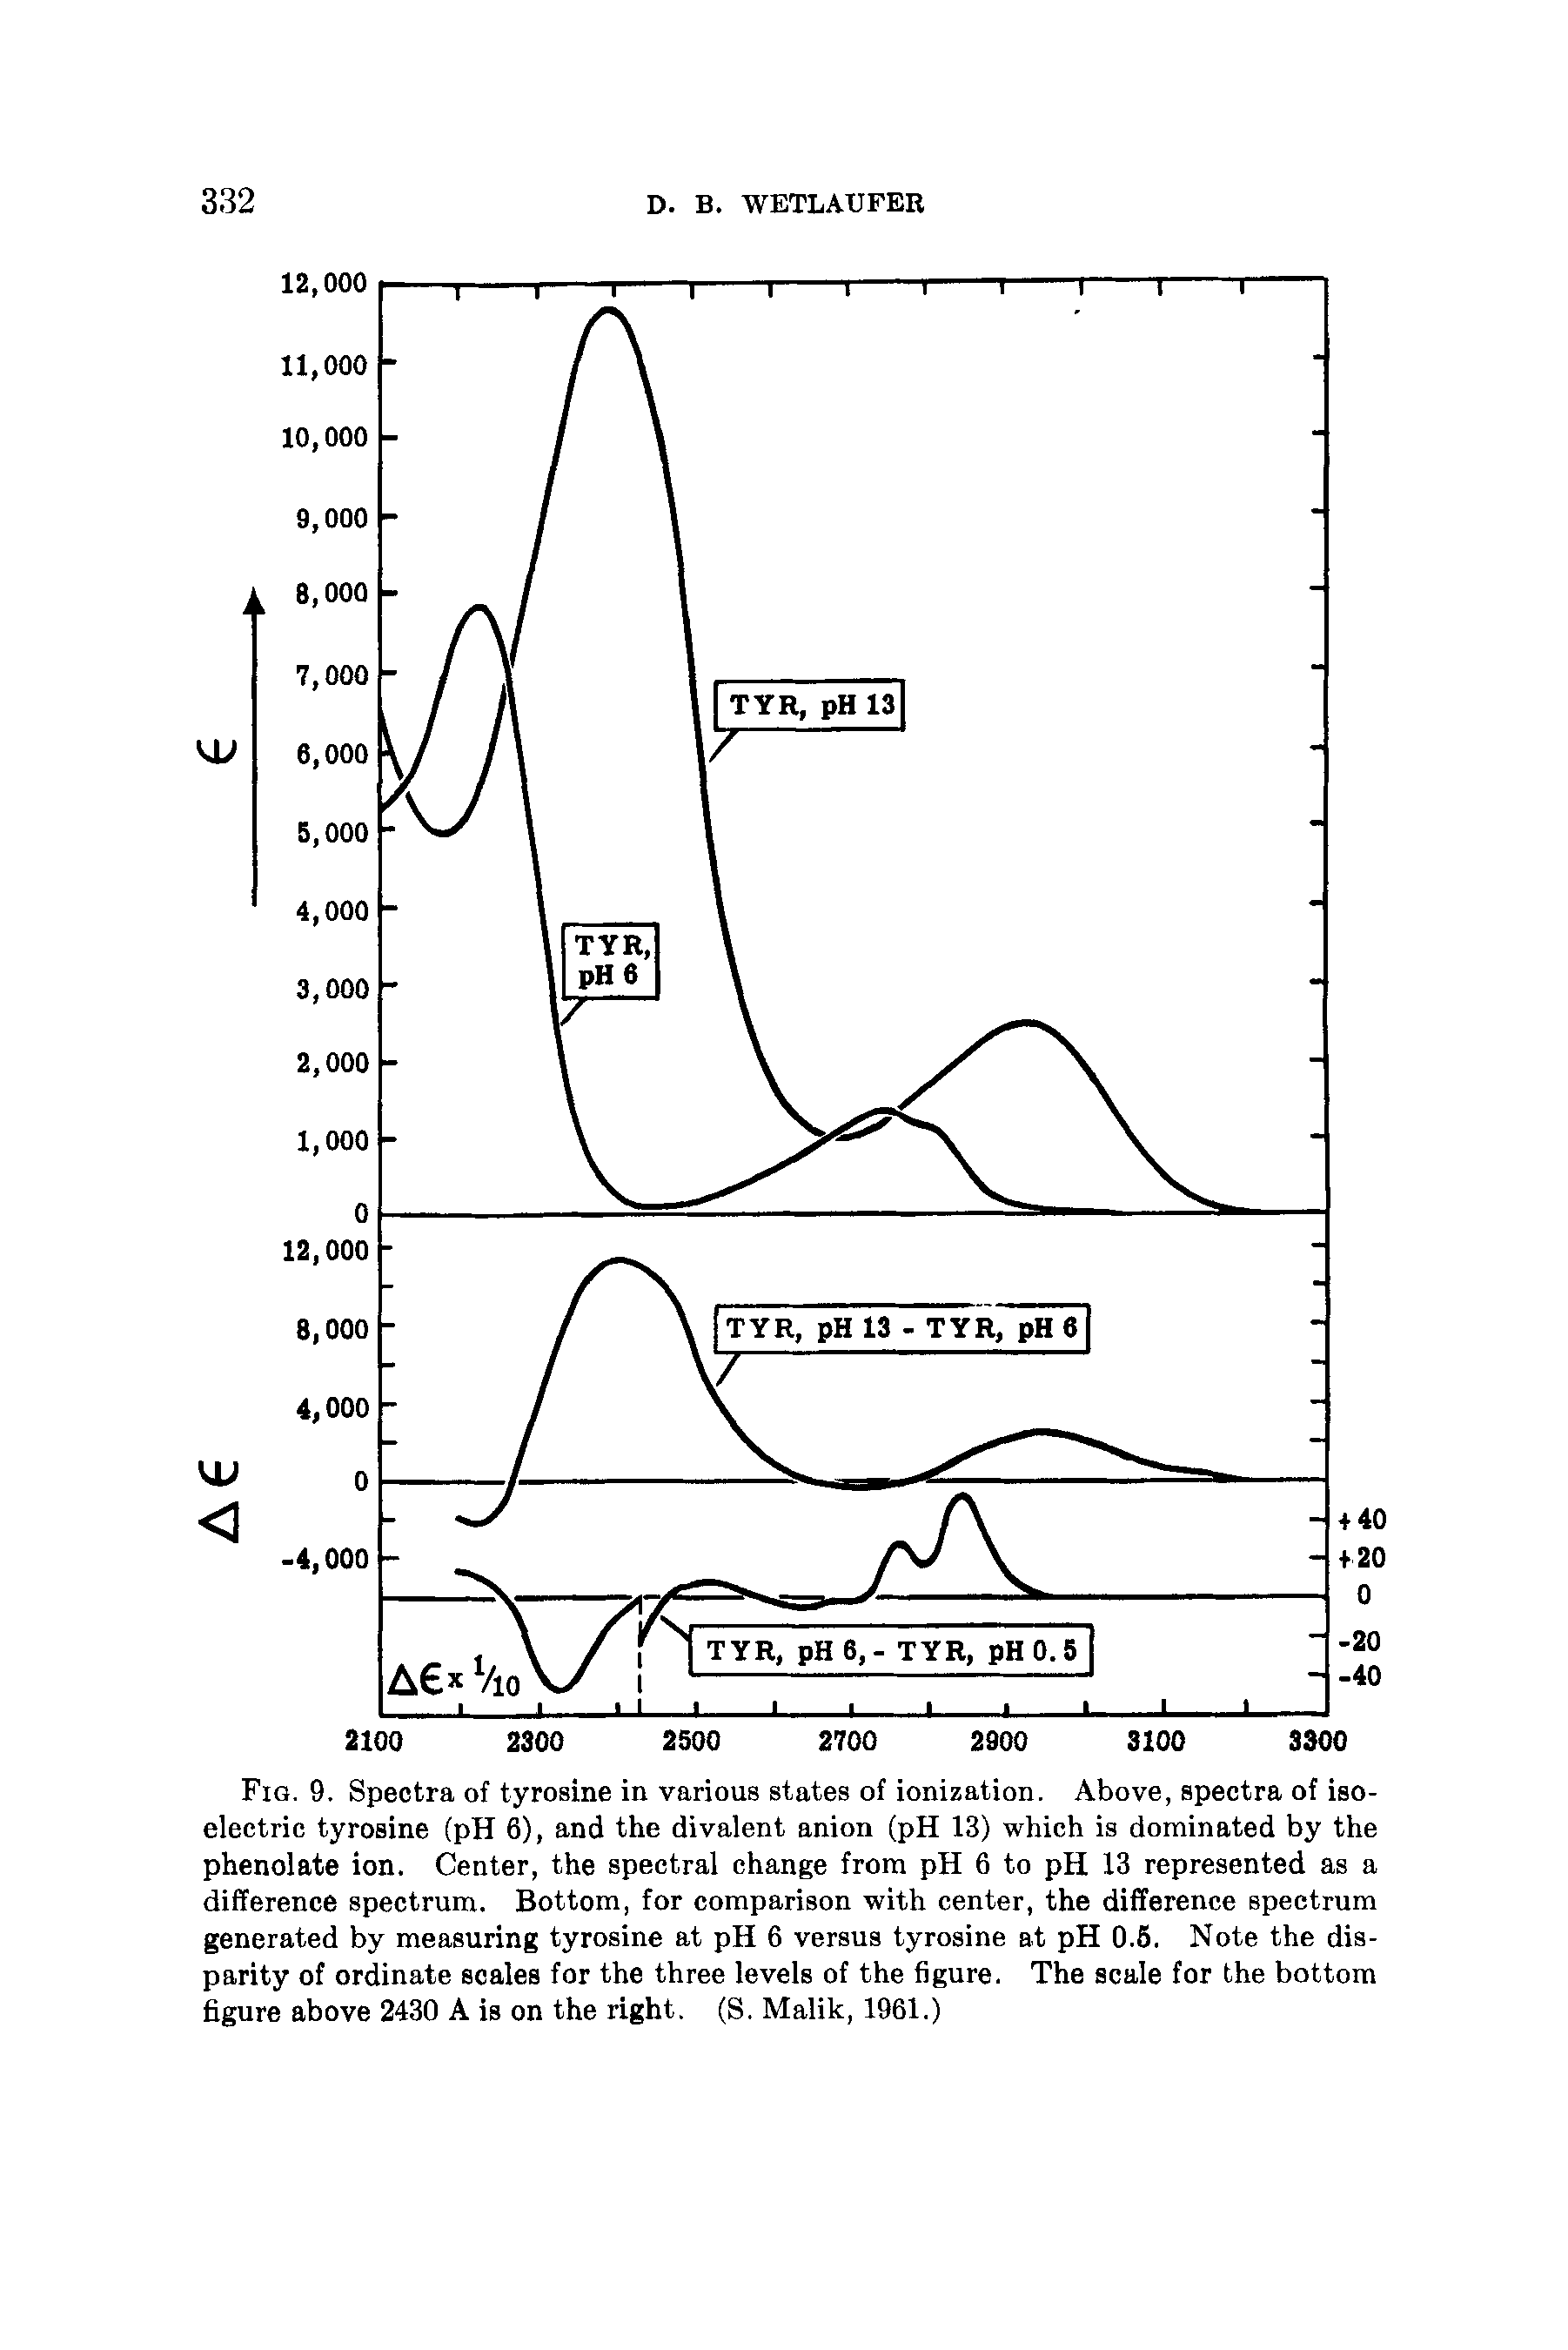 Fig. 9. Spectra of tyrosine in various states of ionization. Above, spectra of isoelectric tyrosine (pH 6), and the divalent anion (pH 13) which is dominated by the phenolate ion. Center, the spectral change from pH 6 to pH 13 represented as a difference spectrum. Bottom, for comparison with center, the difference spectrum generated by measuring tyrosine at pH 6 versus tyrosine at pH 0.5. Note the disparity of ordinate scales for the three levels of the figure. The scale for the bottom figure above 2430 A is on the right. (S. Malik, 1961.)...